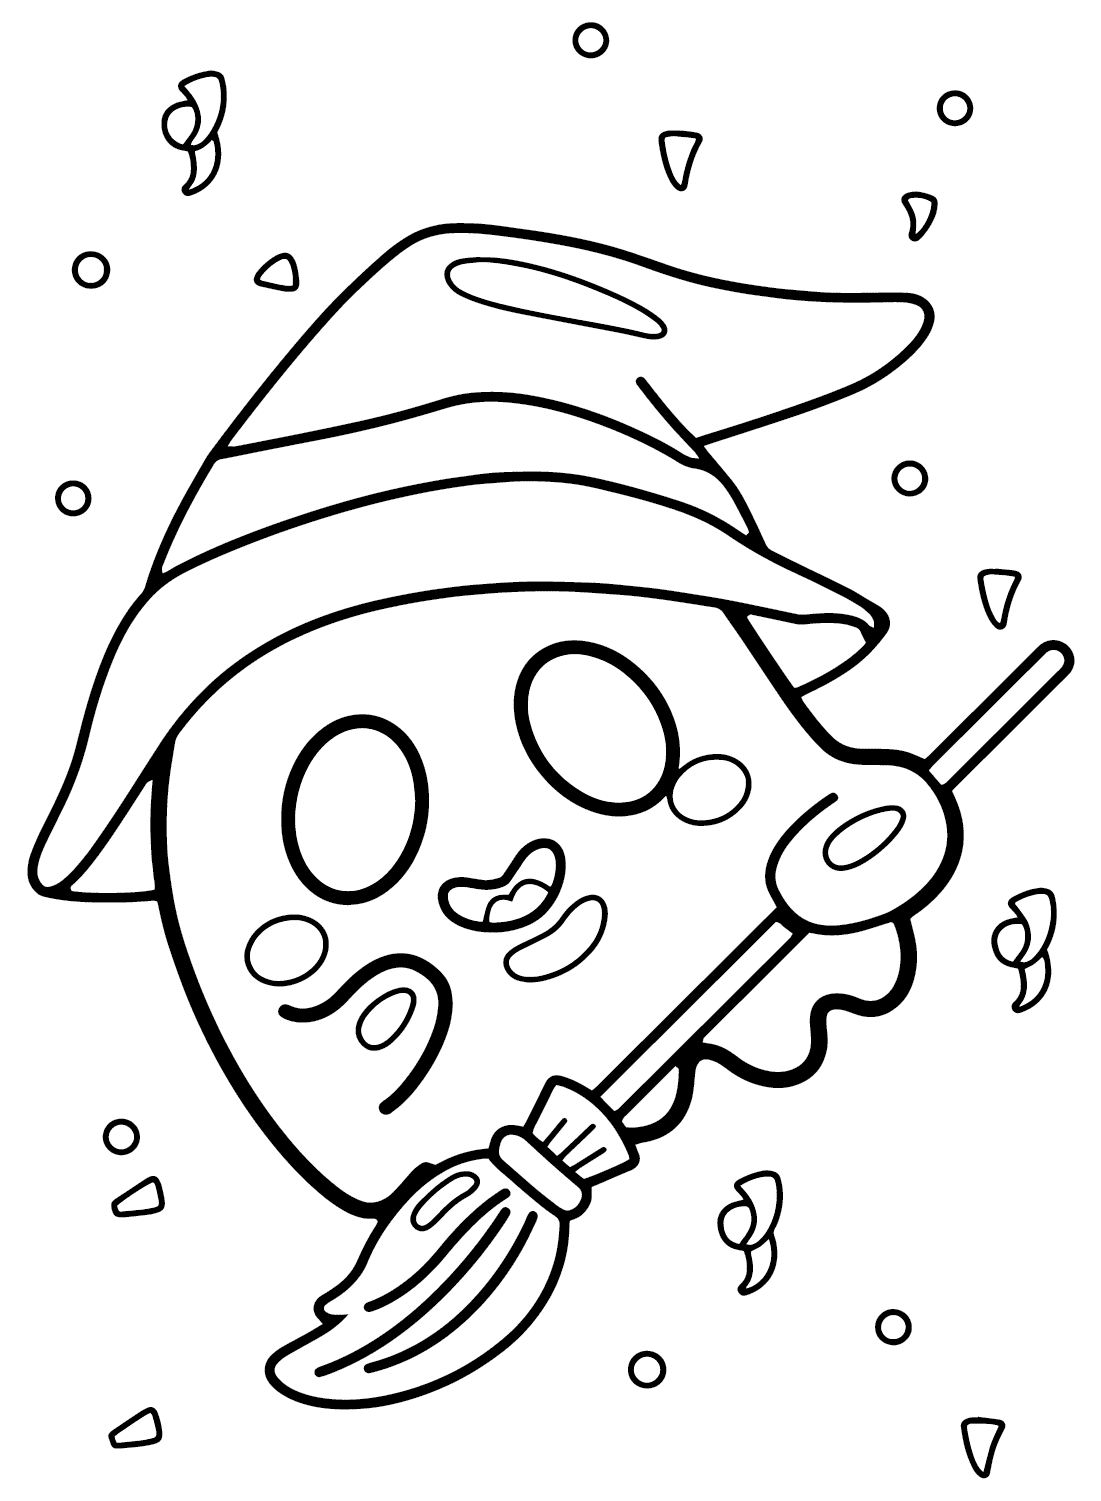 Halloween Coloring Pages Ghost from Ghost